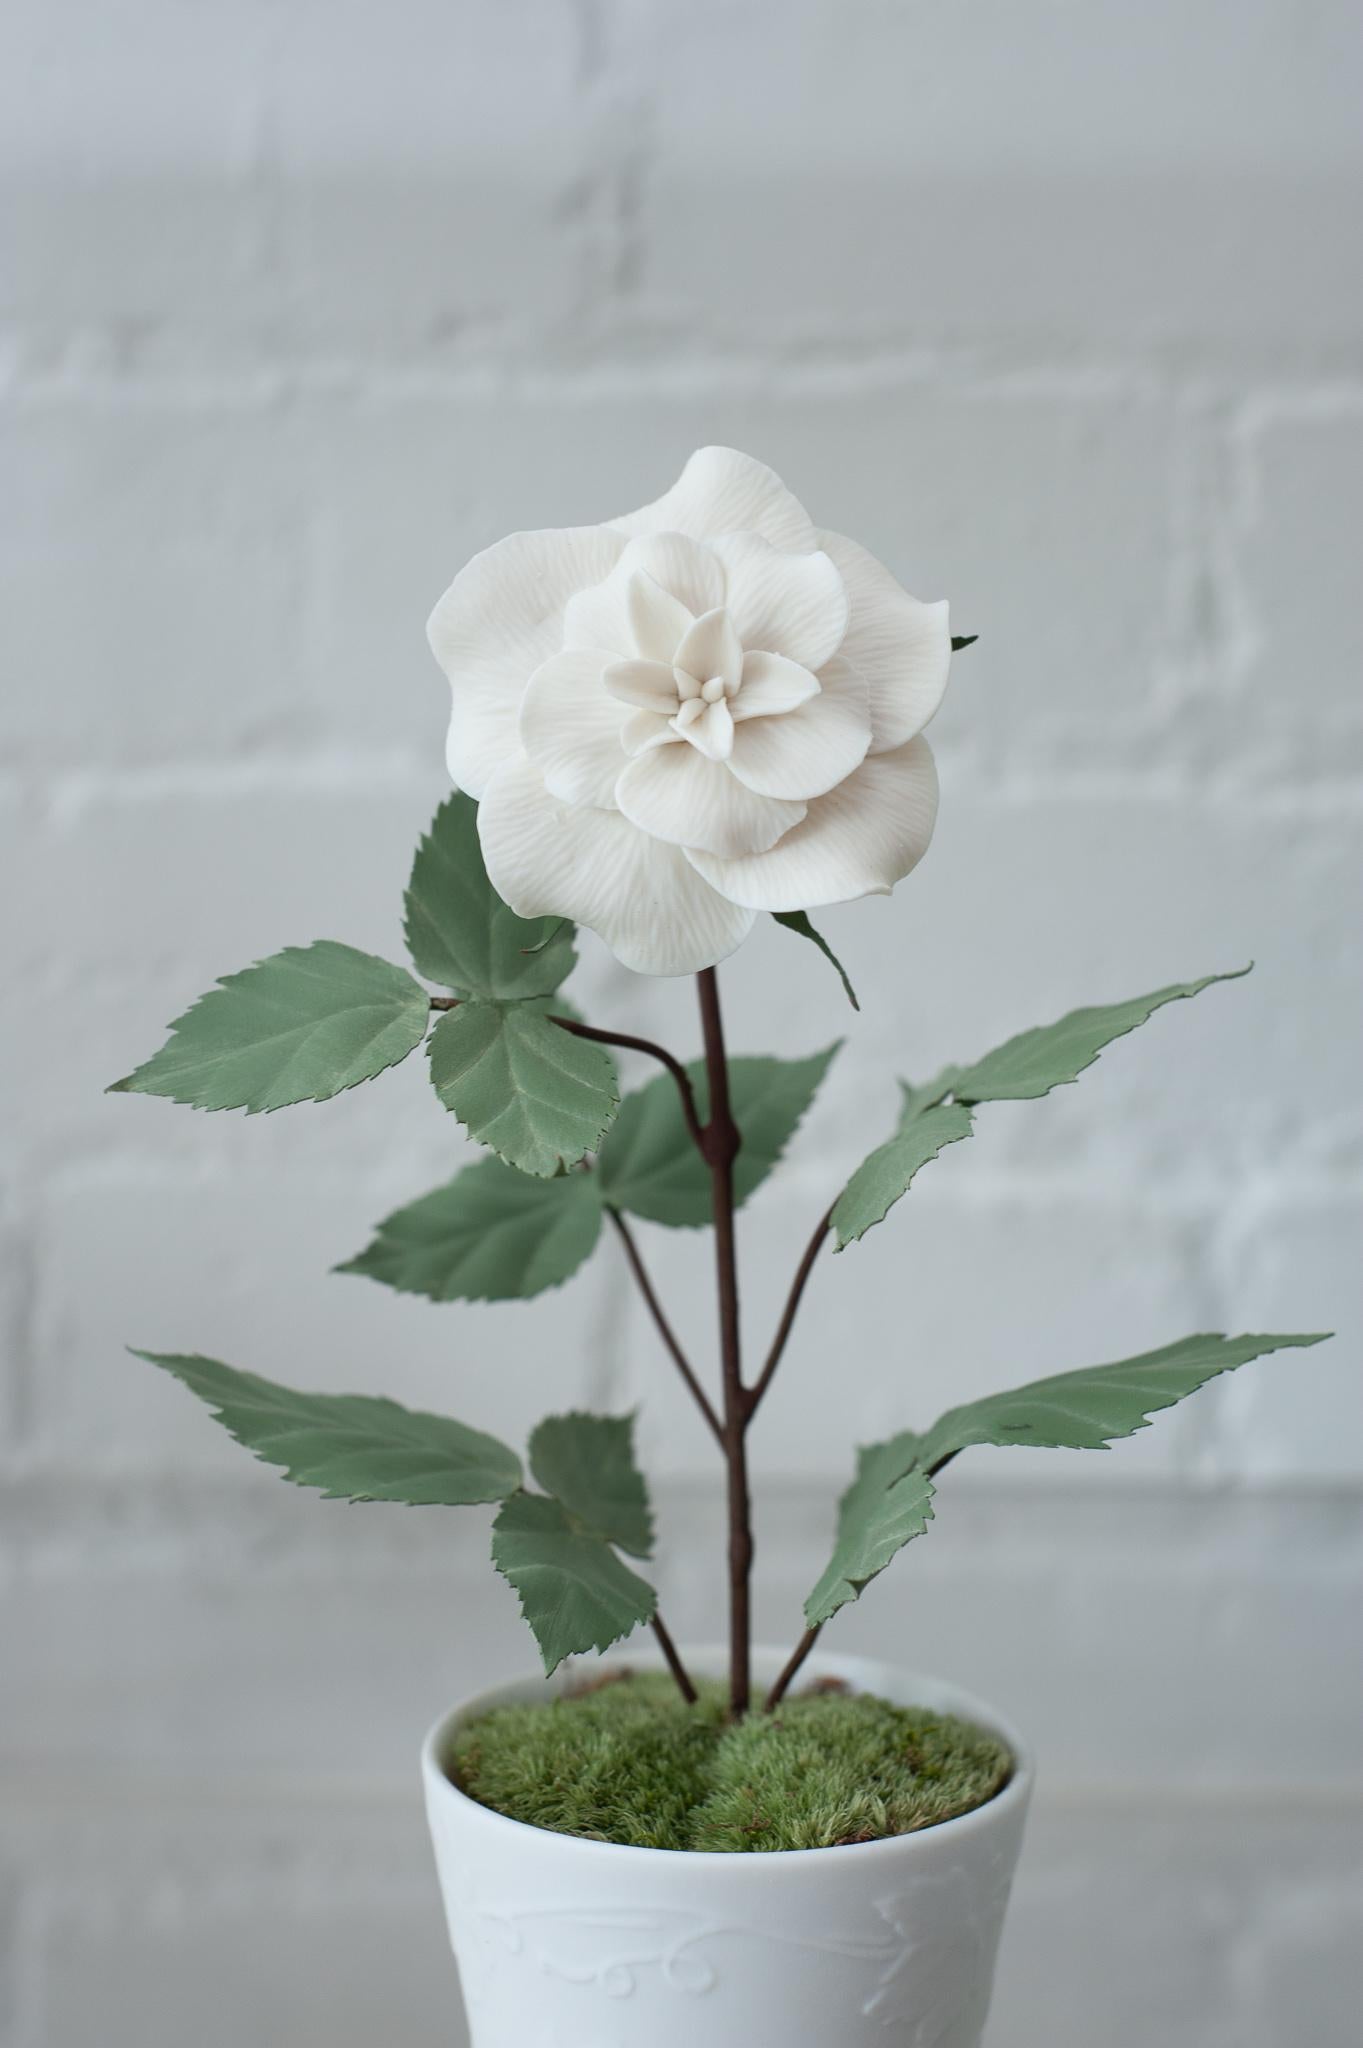 Enhance your table with these delicate porcelain flowers by French artist Samuel Mazy. This Rose Bush is handmade in biscuit porcelain with painted copper leaves and stems, and is placed in a biscuit porcelain pot. An exclusive floral collection